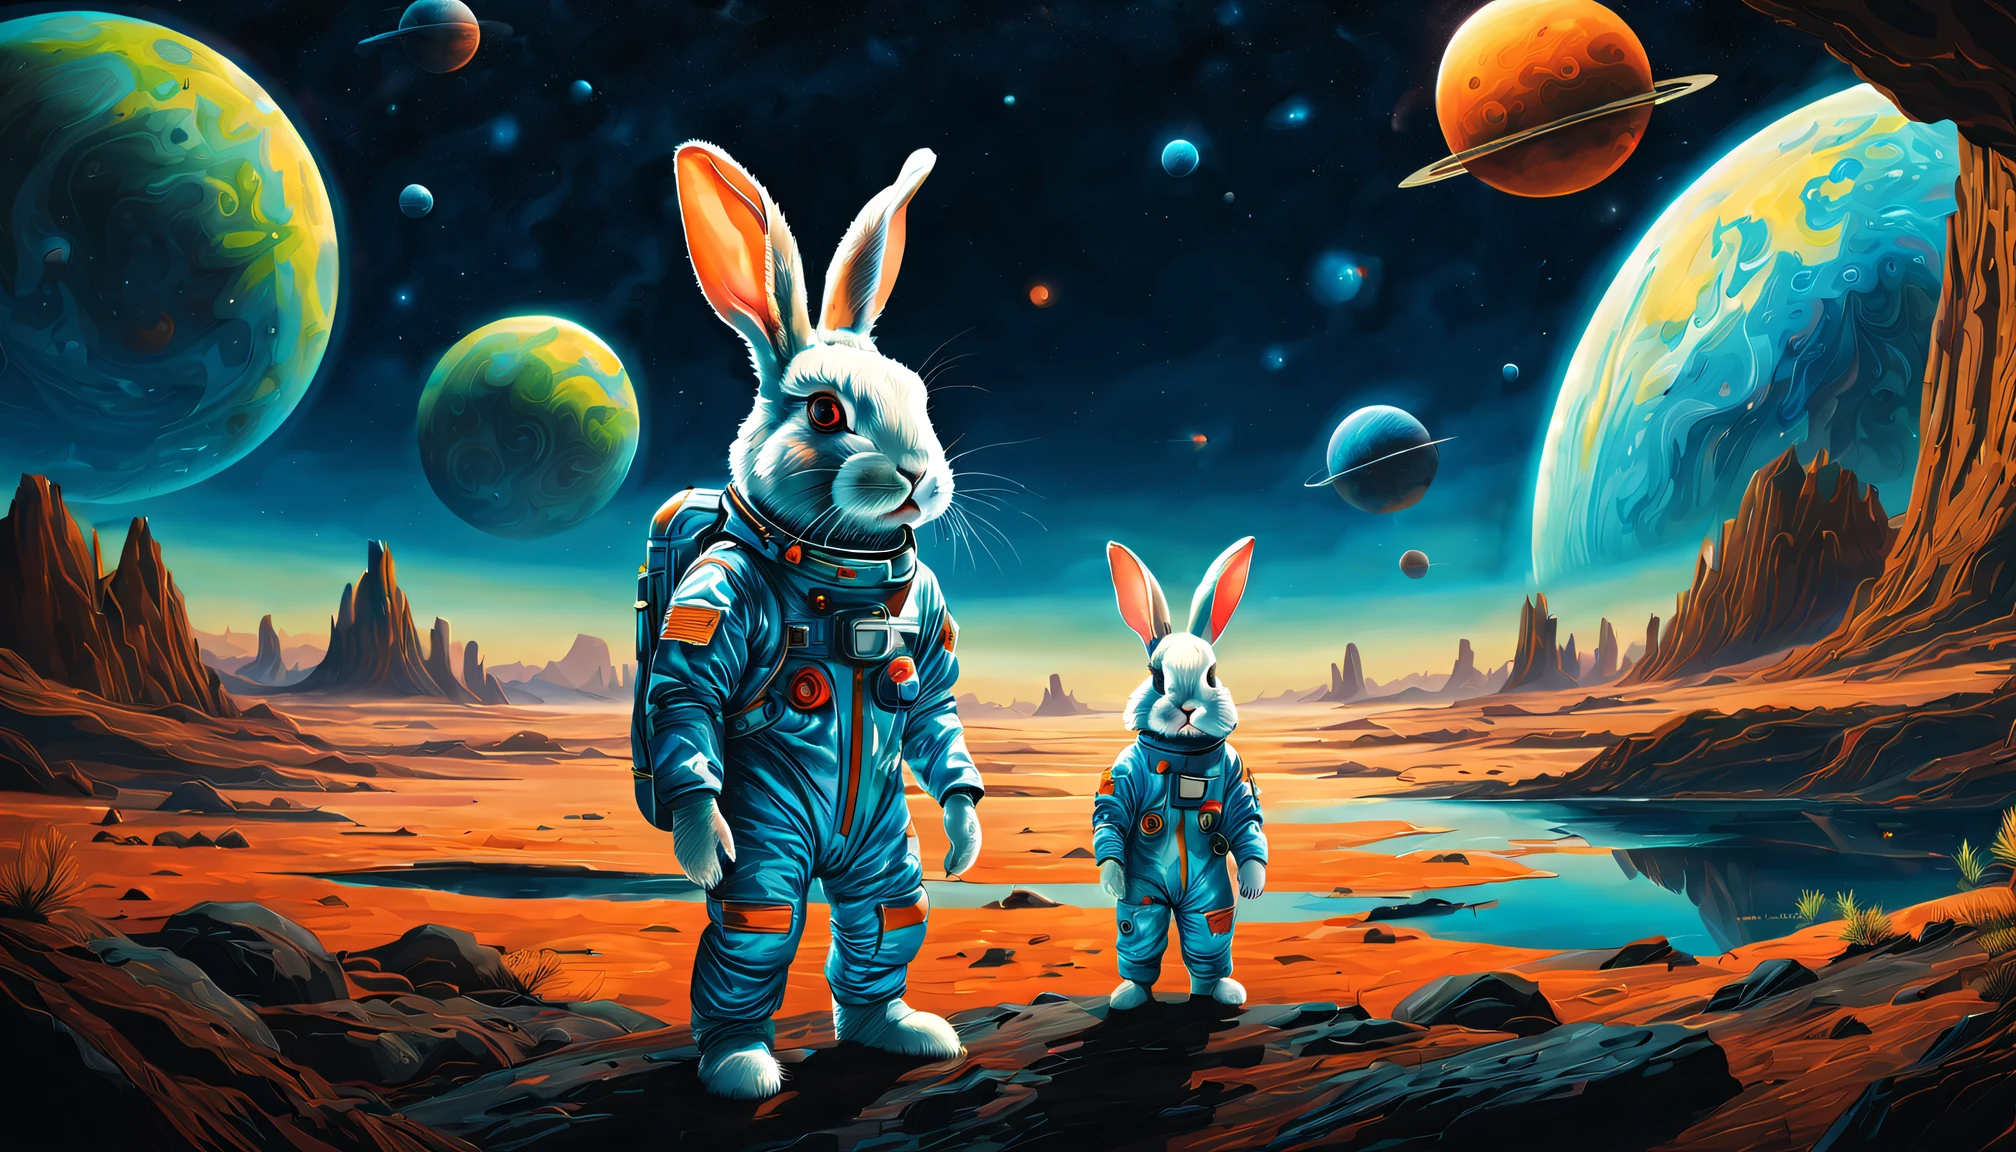 oil painted，(((A bioluminescent rabbit))), horrified expression, Dressed in a high-tech spacesuit,  Stand on the windowsill，Look at the Earth with a space background in front of you, Post-apocalyptic background style, Bright warm colors, Movie poster, Compelling documentary photographs, Earthworks, metallic rotation, IMAX, 21st century, The man in the spacesuit is gone & Wander through a landscape surrounded by planets, In the style of Imax, Anna Dietman, Alexey Briklot, Alex Colville, centered image, hyper detailed illustration, posing on a, (Four colors), Whimsical, Enchanting, children's storybook, (ink lines:1.1), strong outline, art by mschiffer, Bold markers, unframed, High contrast, (cel-shaded:1.1), vectorial, 32K resolution, Best quality, Flat colors, Flat lights. The fusion of art and mathematics, ultra - detailed, trending on art station, Sharp focus, Studio photography, intricately details, Highly detailed, Centered, perfectly symmetrical,